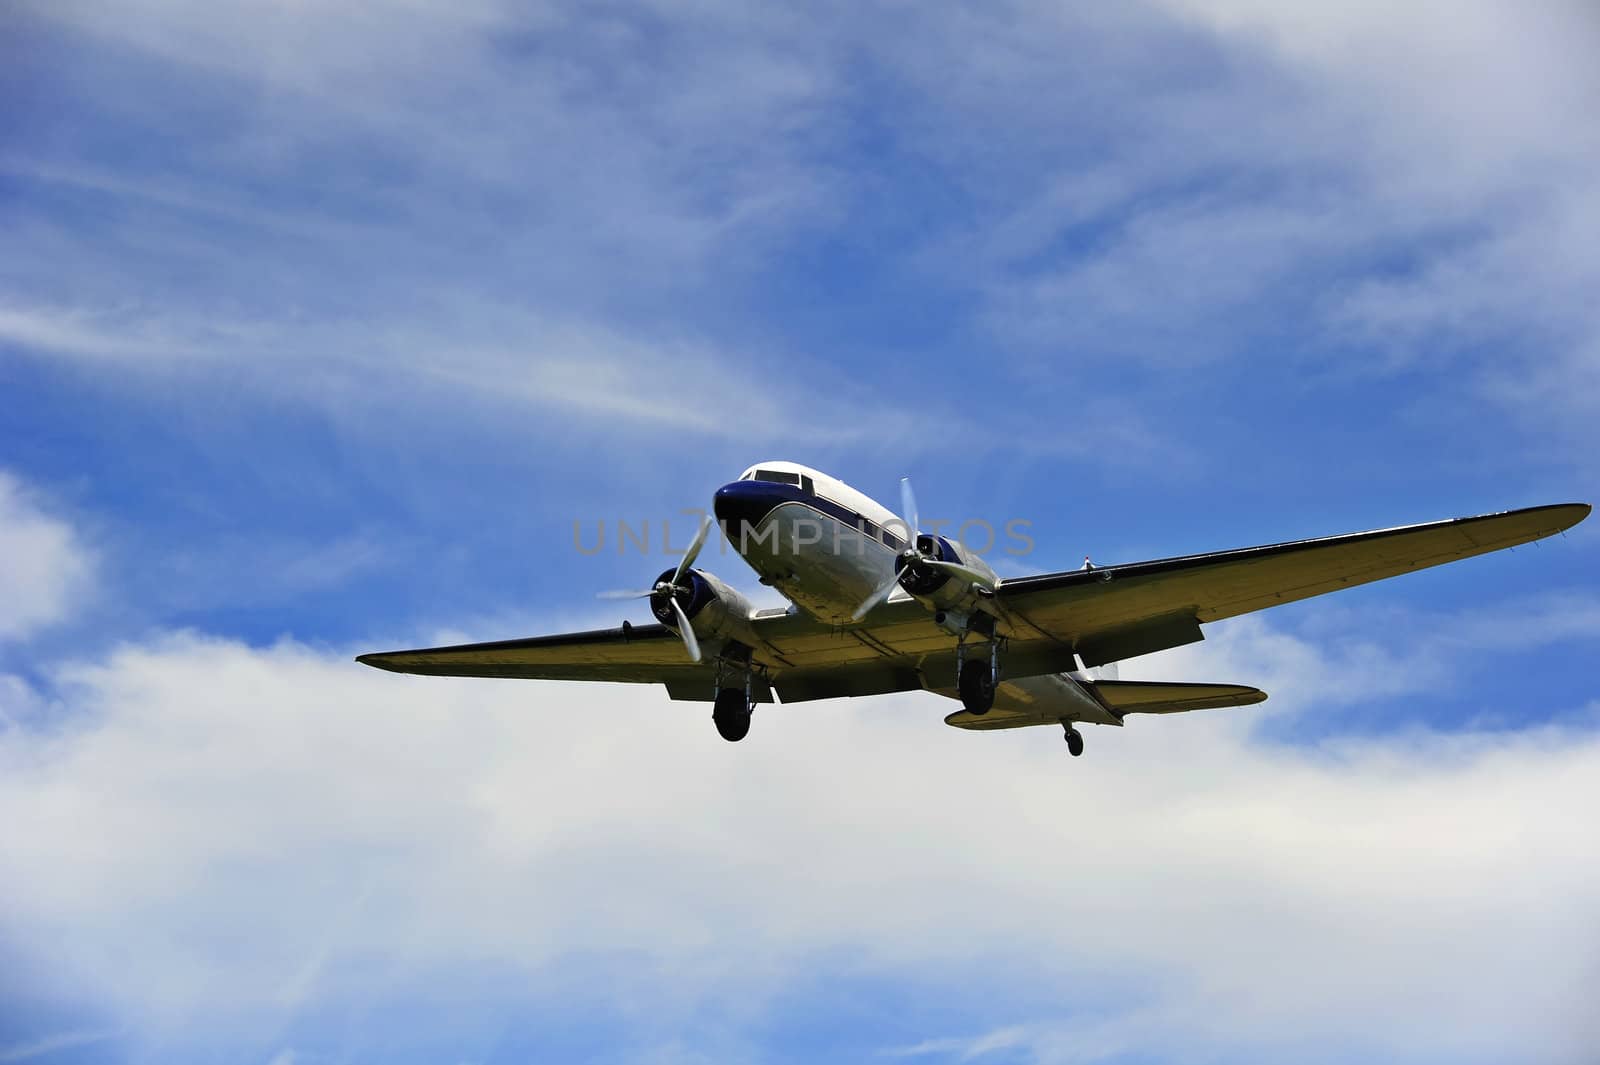 A vintage Douglas DC-3A (Dakota) coming in to land at an airfield